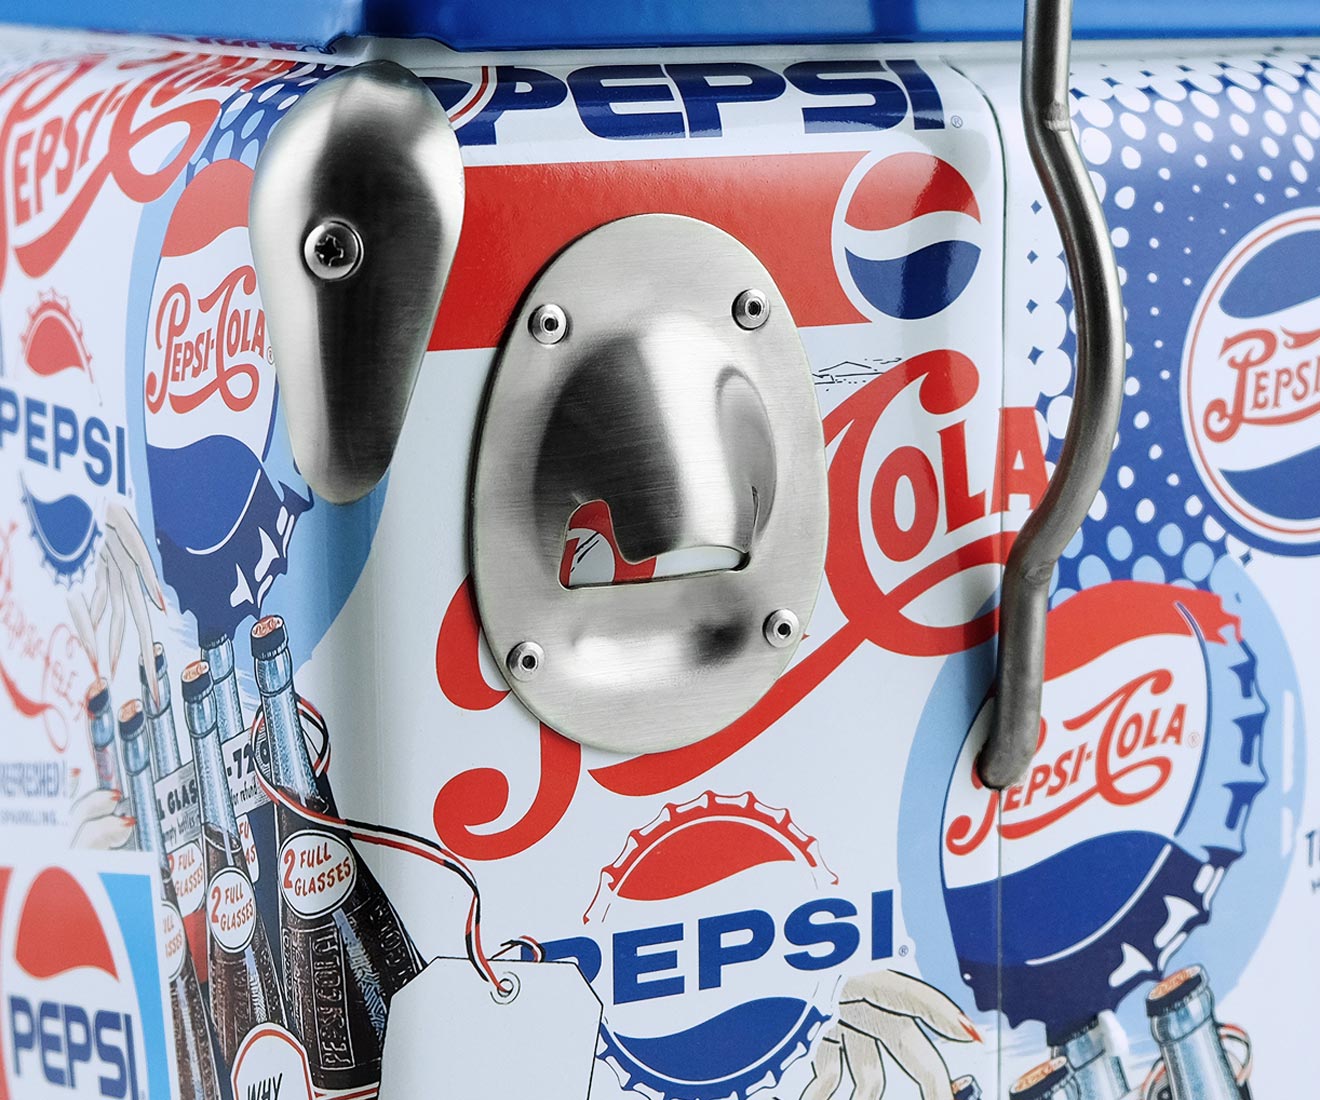 Pepsi 14-Quart Small Portable Picnic Cooler with Old Vintage Pepsi Logos Officially Licensed Cooler Personal Cooler Product Features Image 2